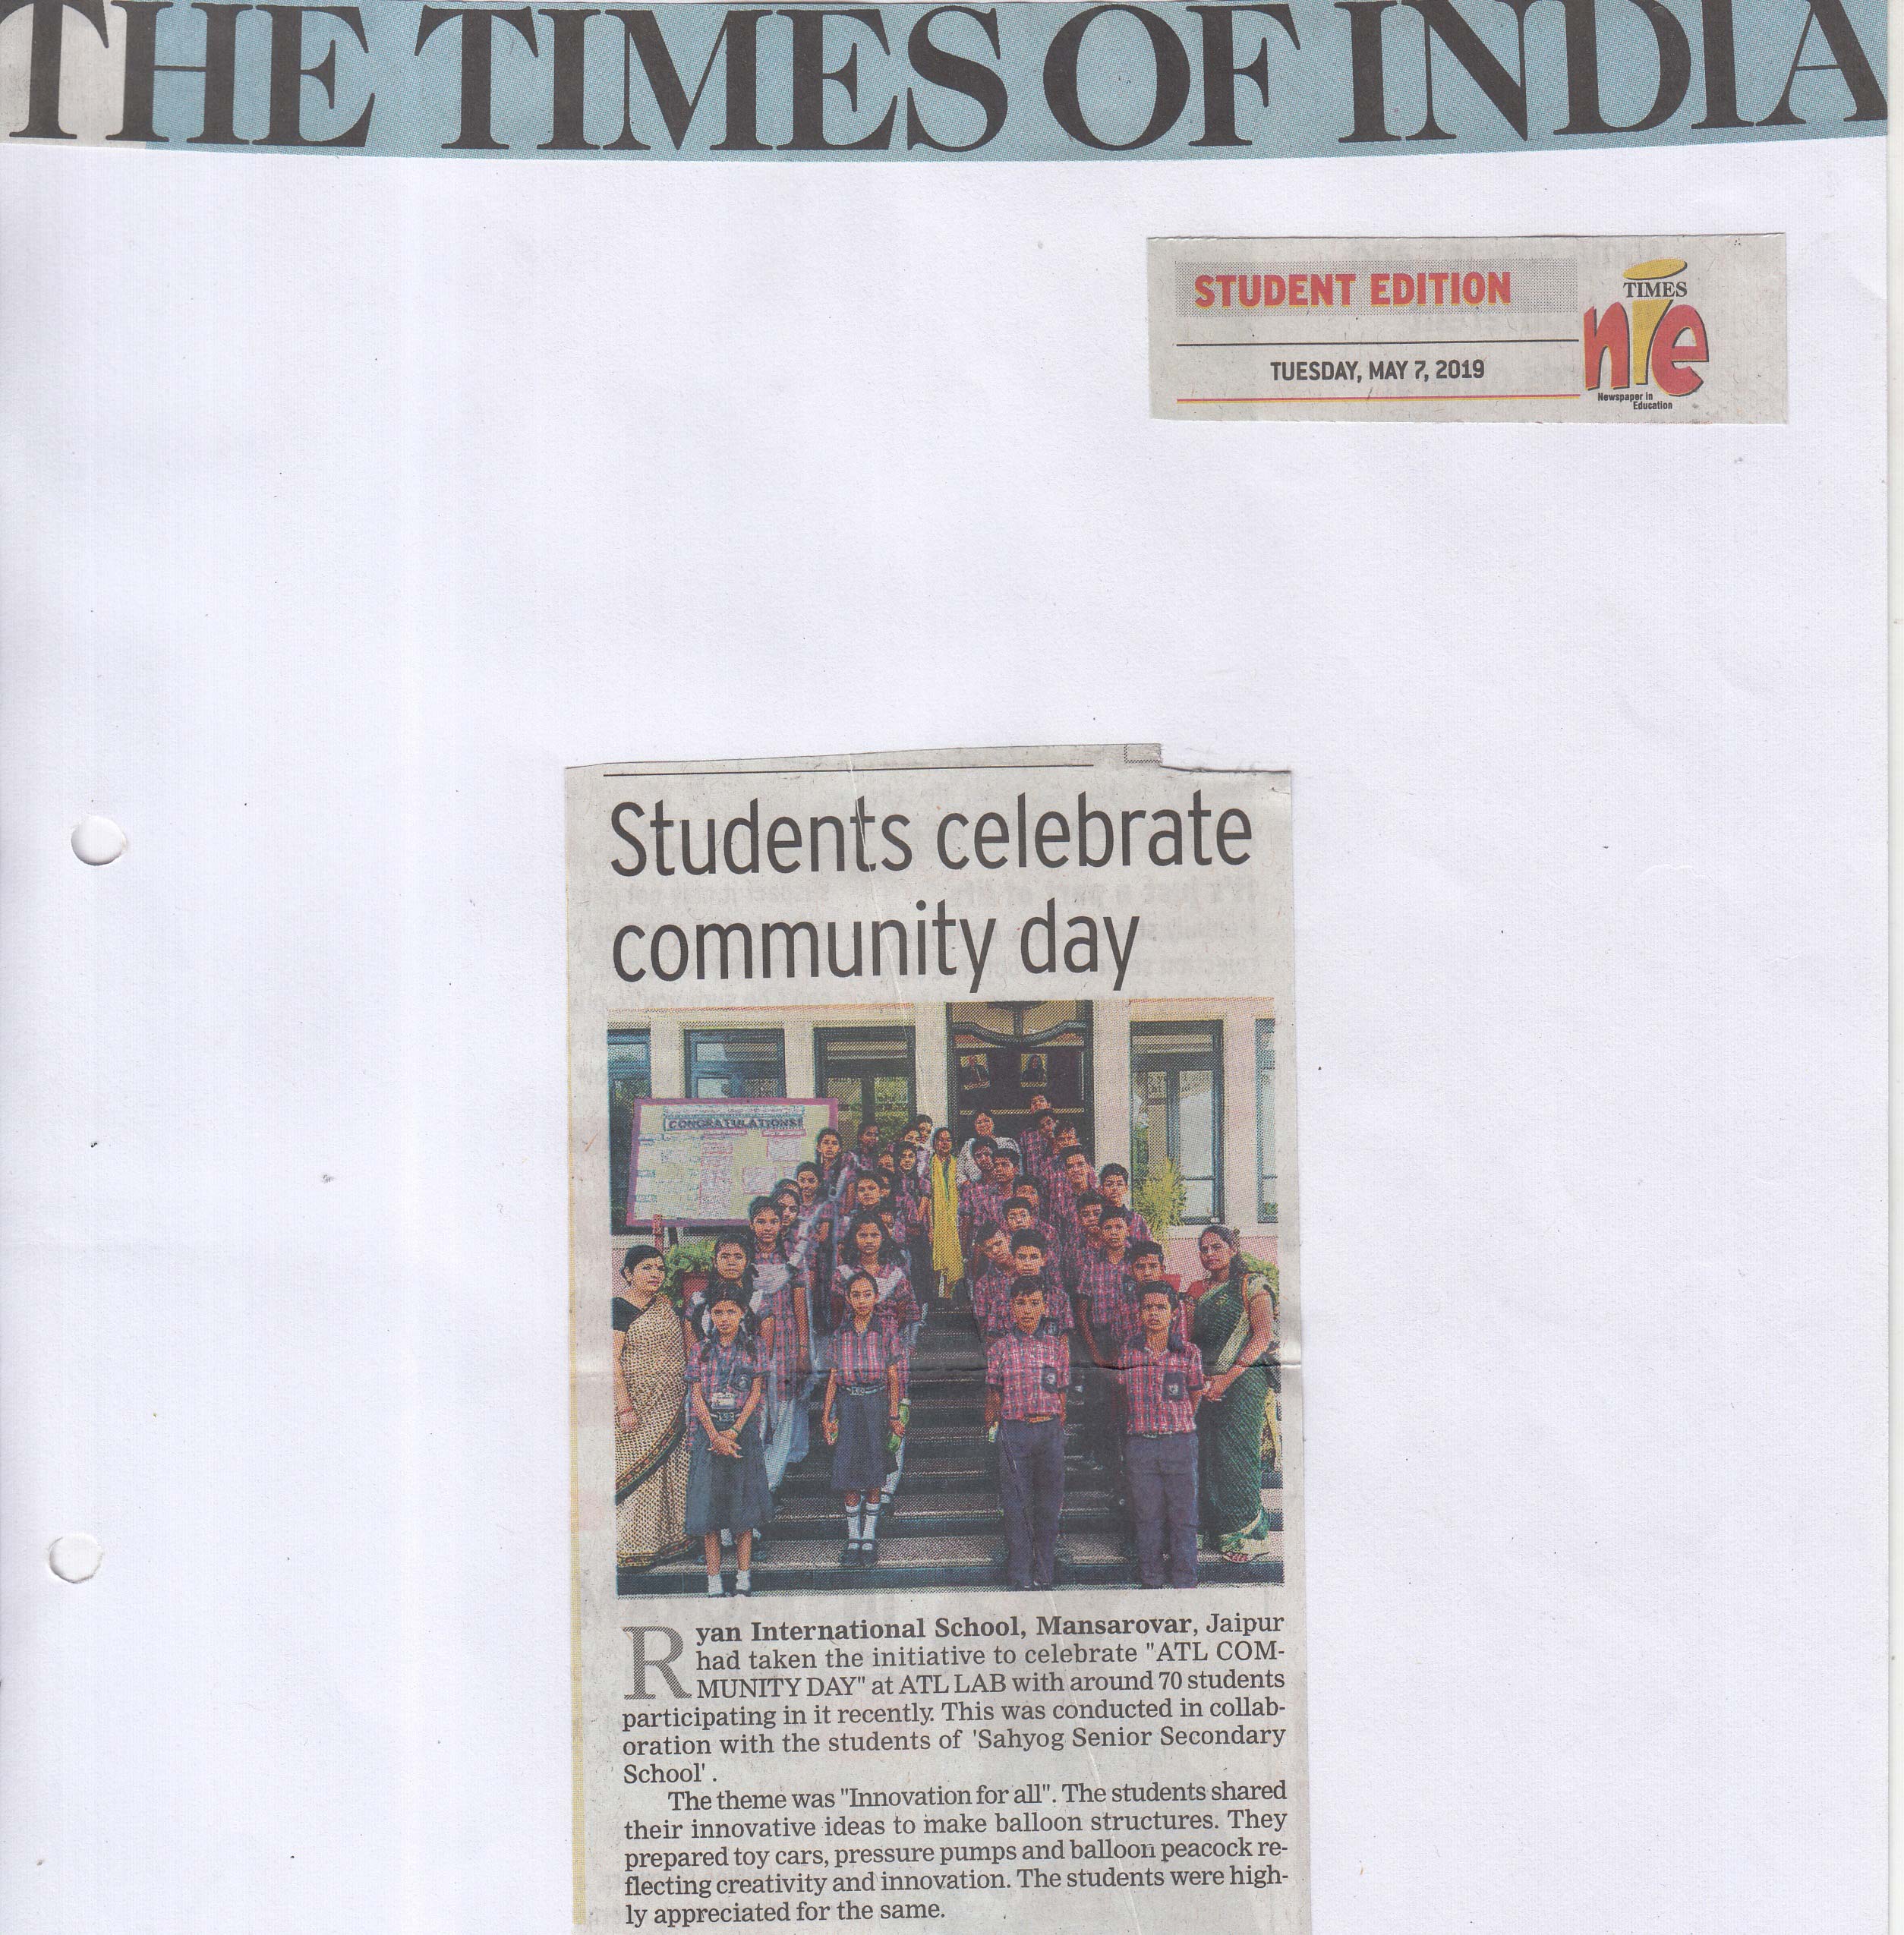 Students celebrate ATL community day Featured in Times of India